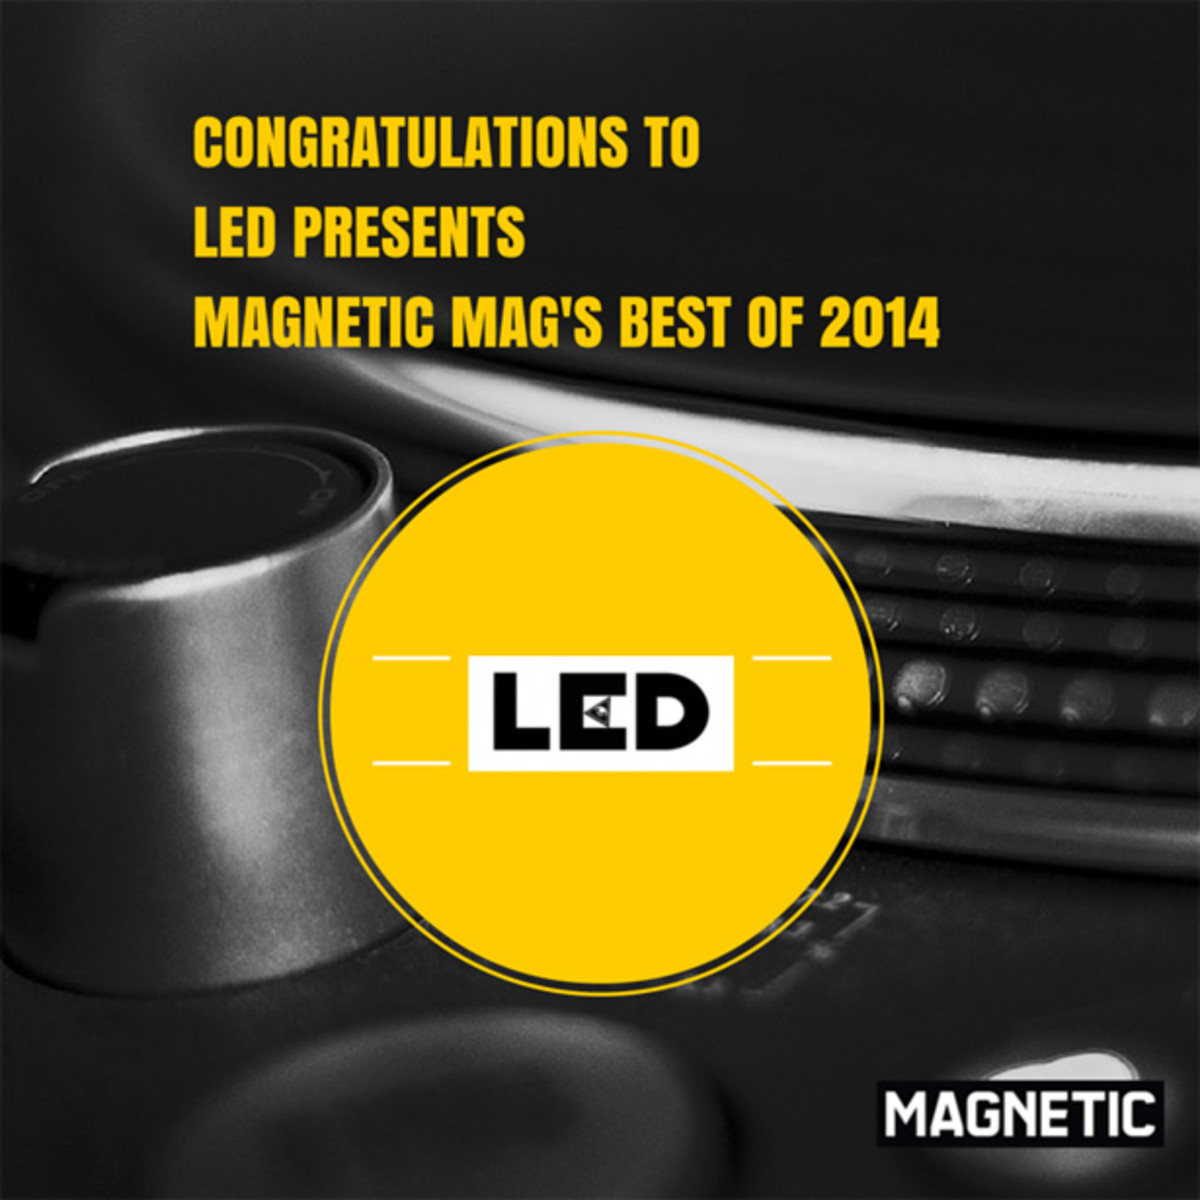 The Winner Of The Best Promoter Category for Magnetic Mag’s Best Of 2014